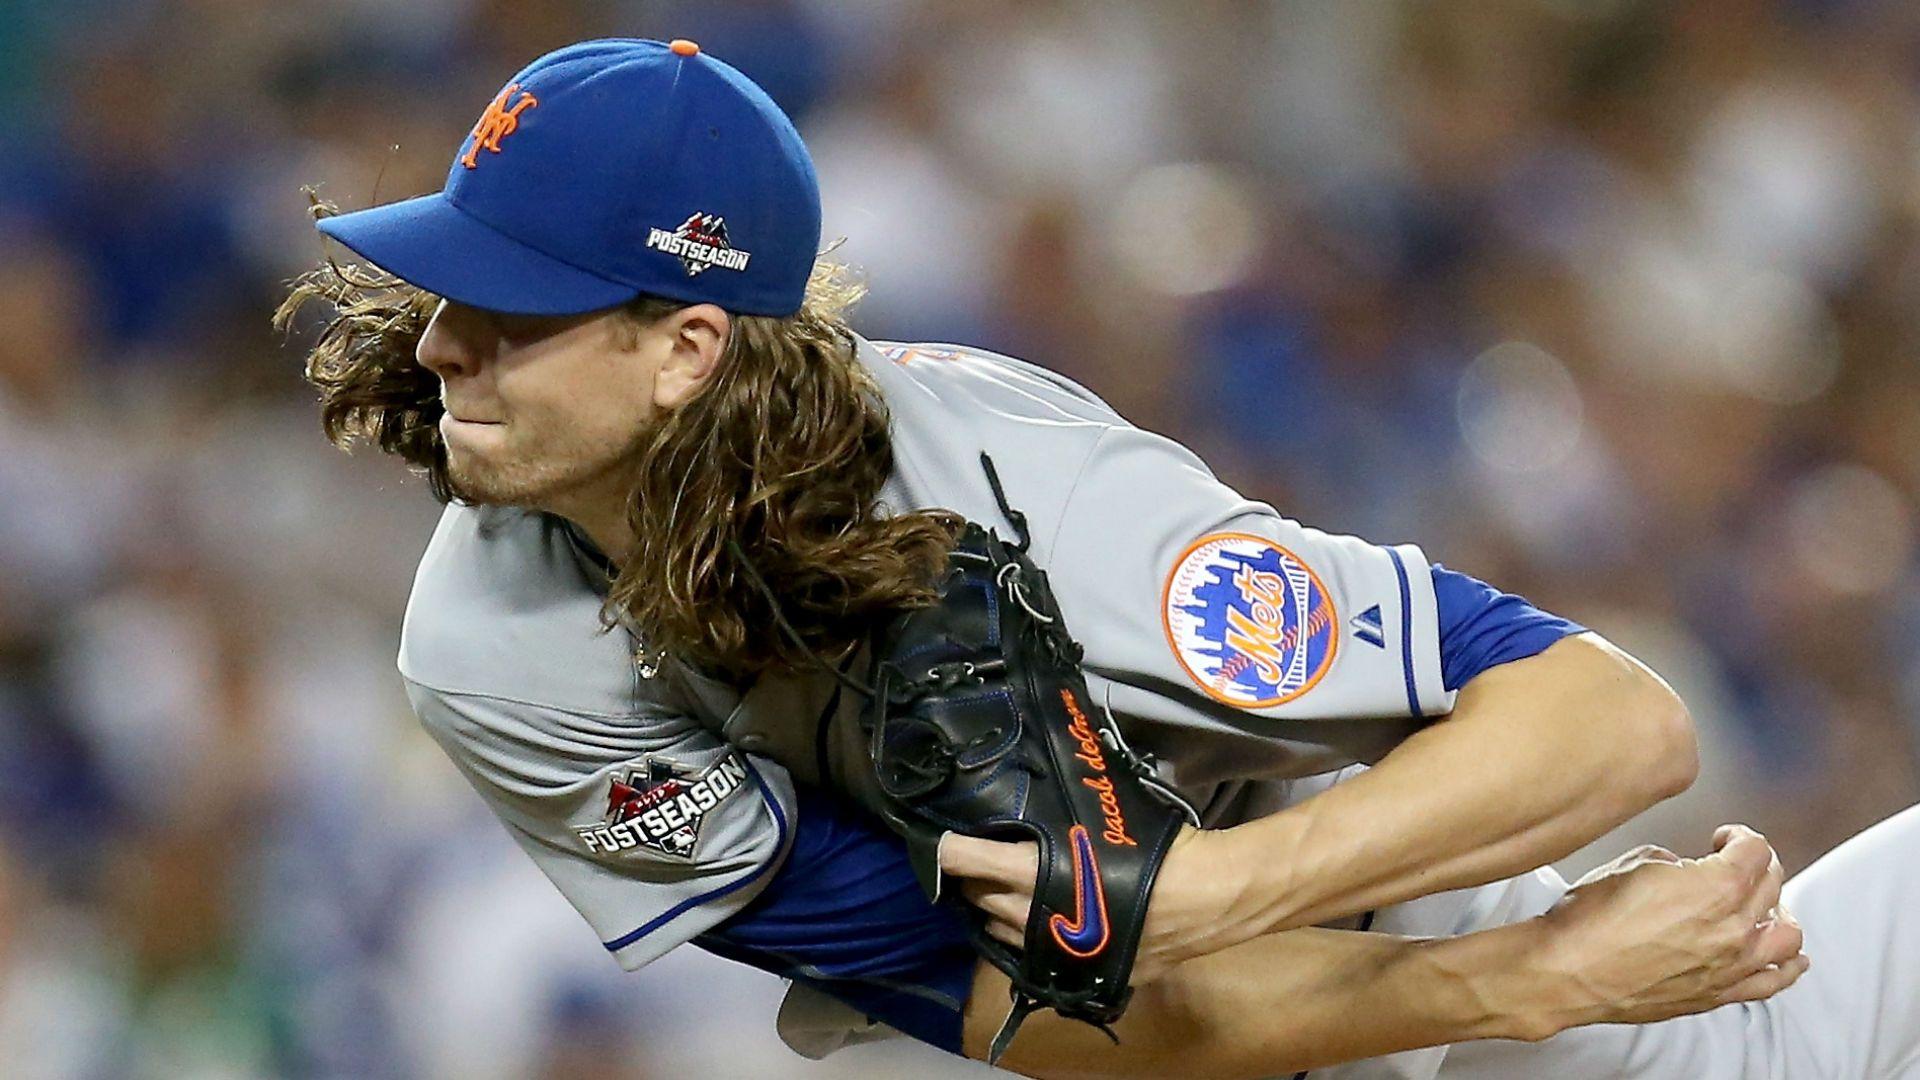 Jacob DeGrom Injury Update: Mets Place P On 10 Day DL With Elbow